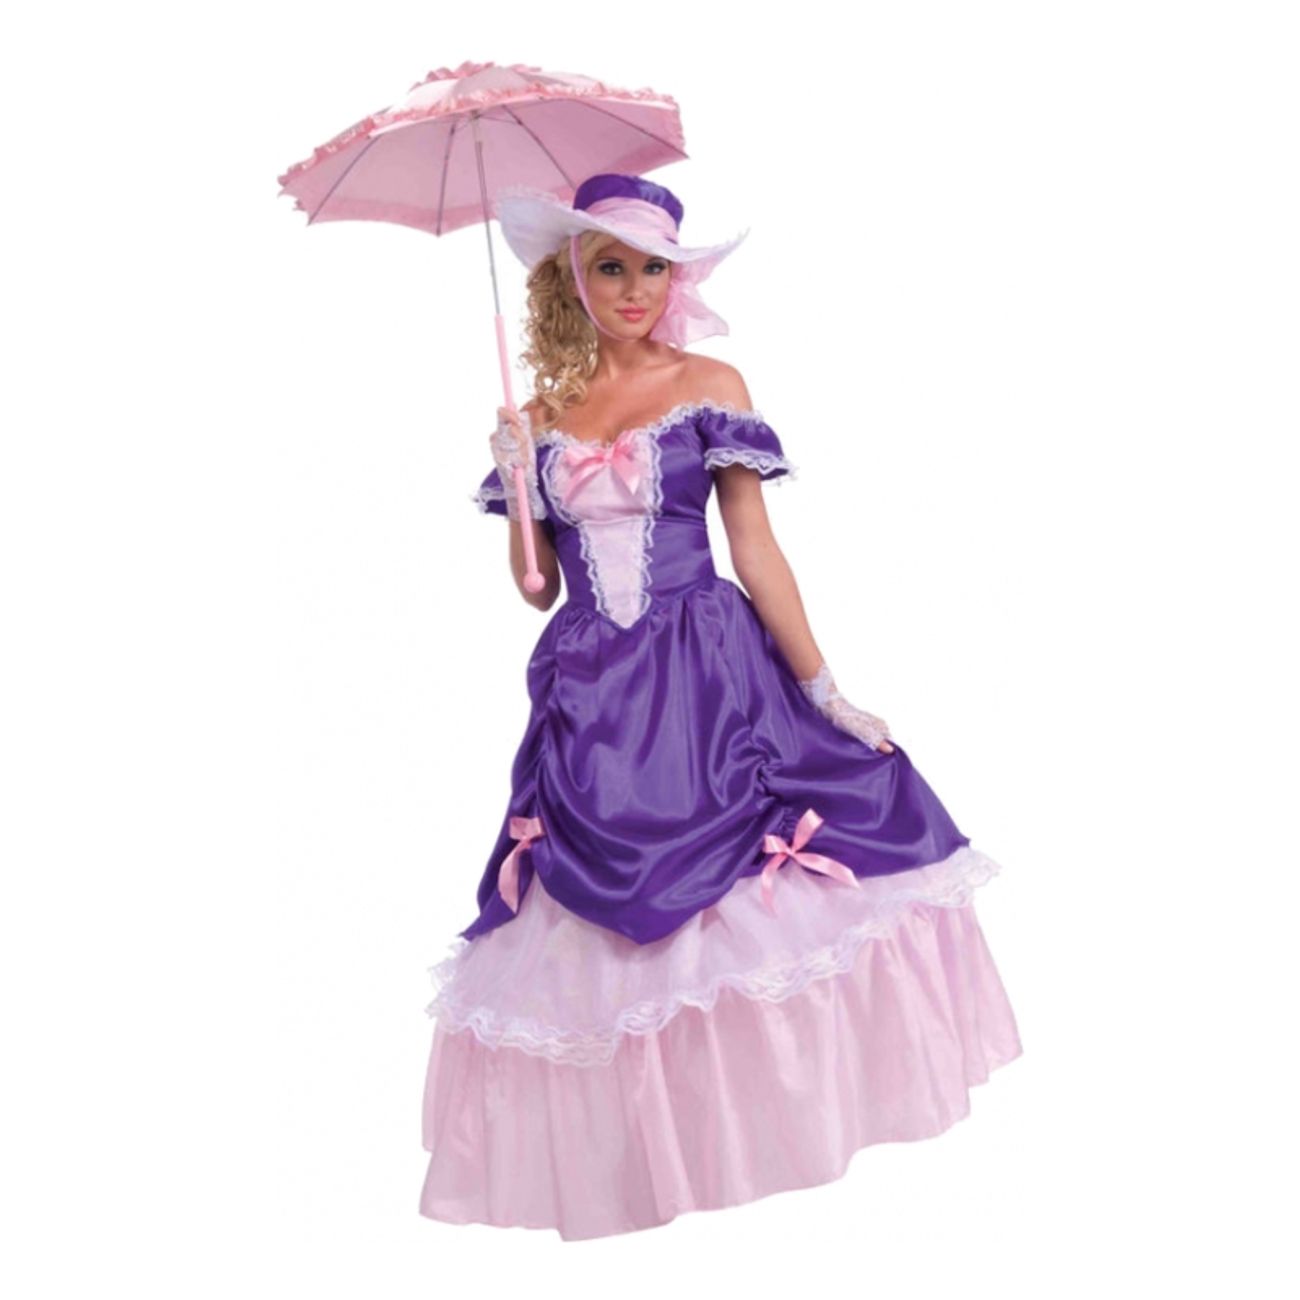 southern-belle-dress-costume-1